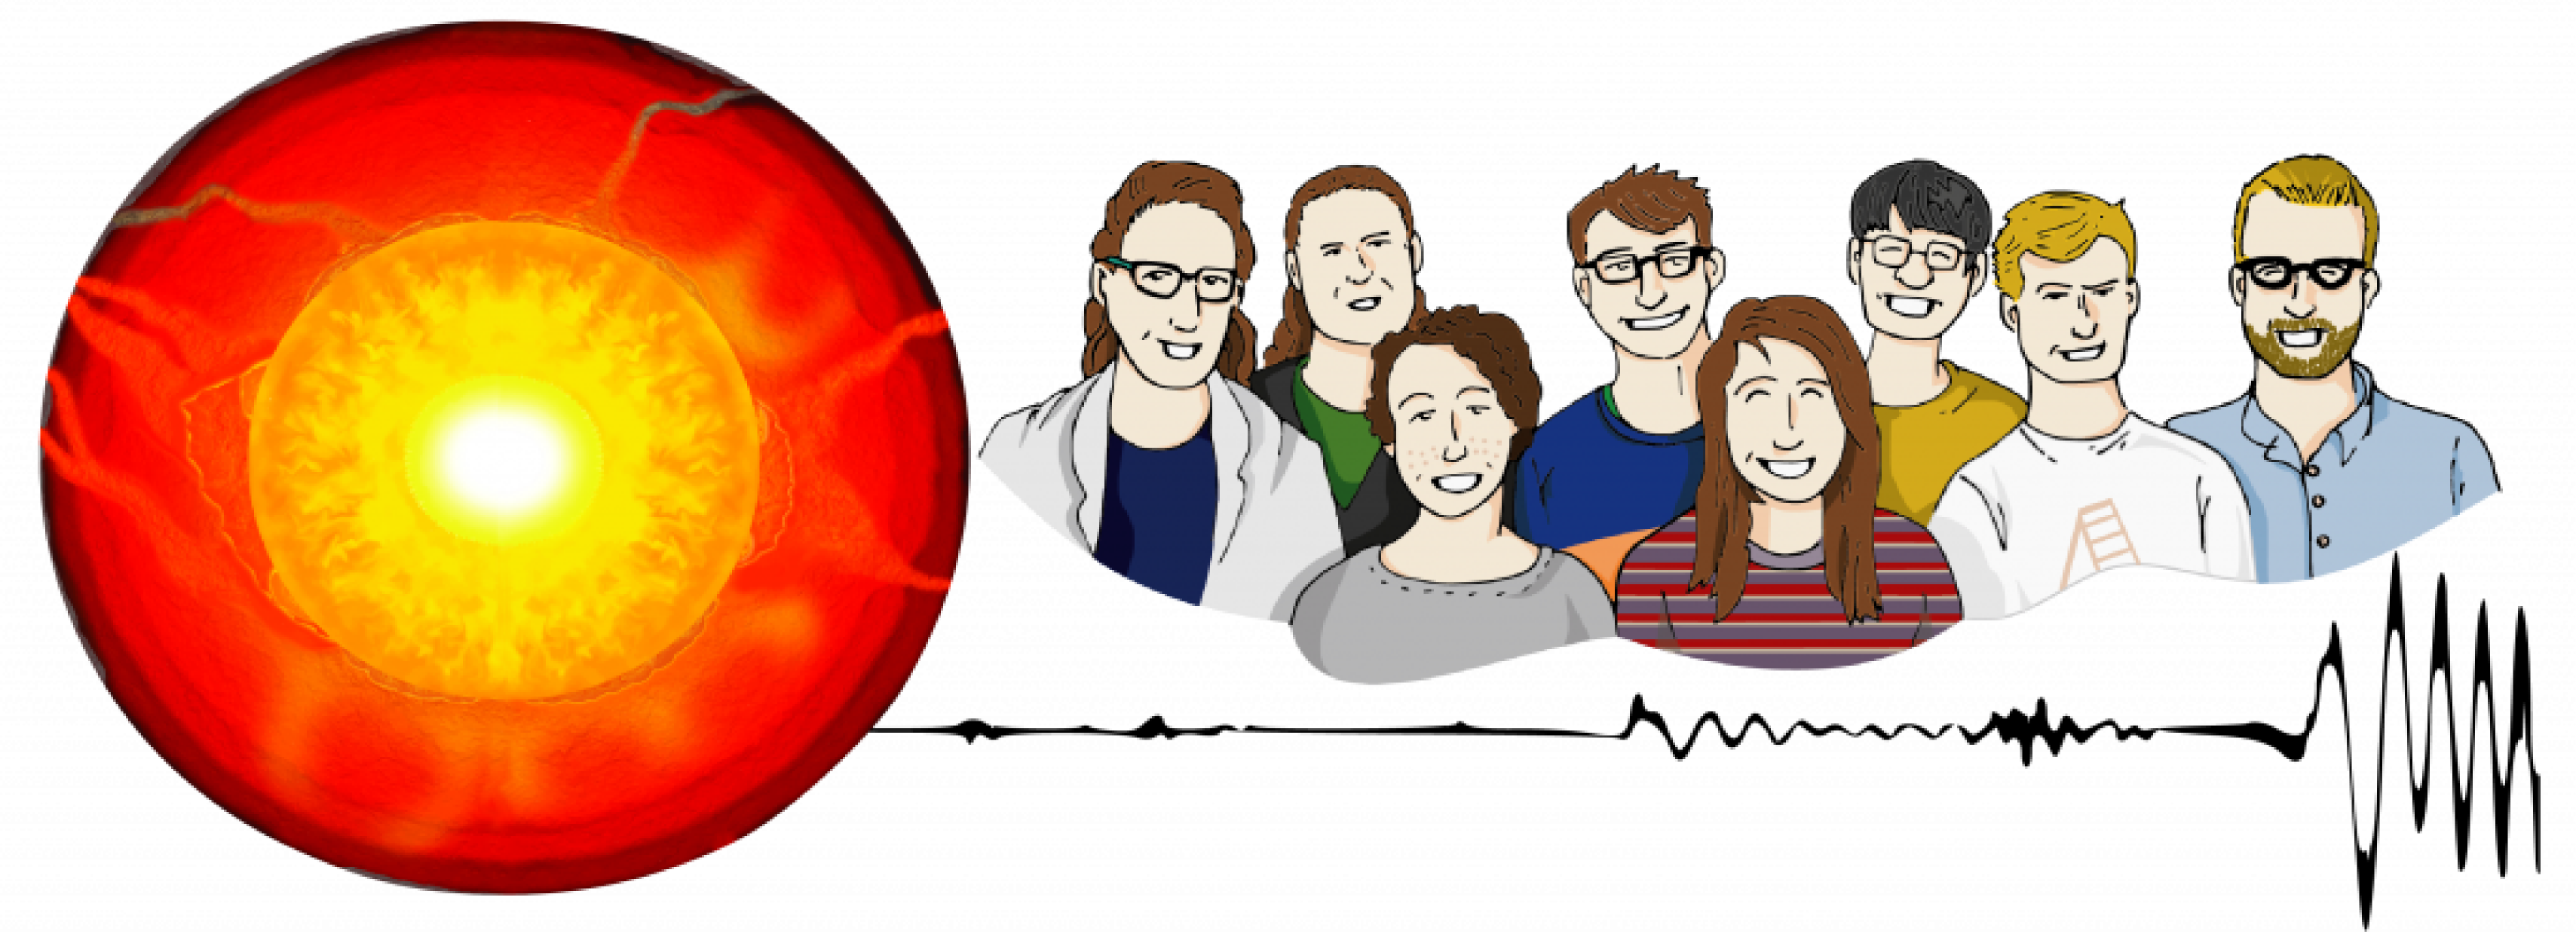 Illustration showing members of the Deep Earth Explorers research team alongside a schematic of the Earth's interior and a seismic wave